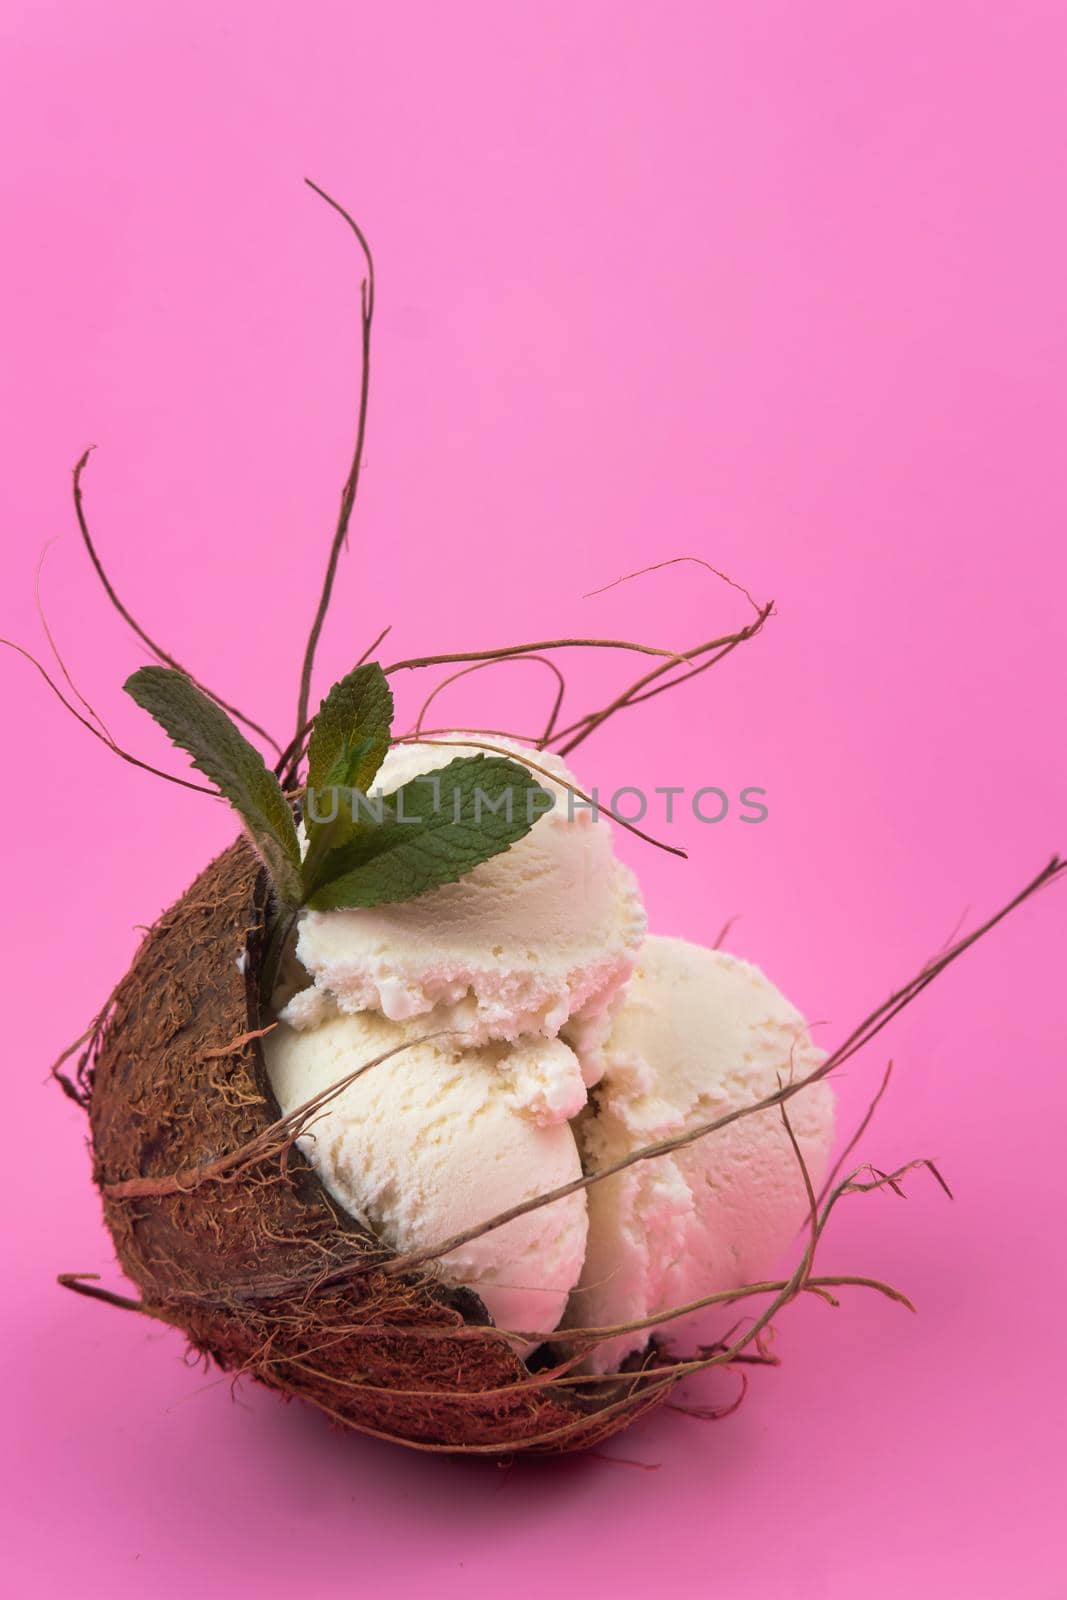 Vanilla ice cream balls in an empty coconut decorated with mint leaves on a pink background.